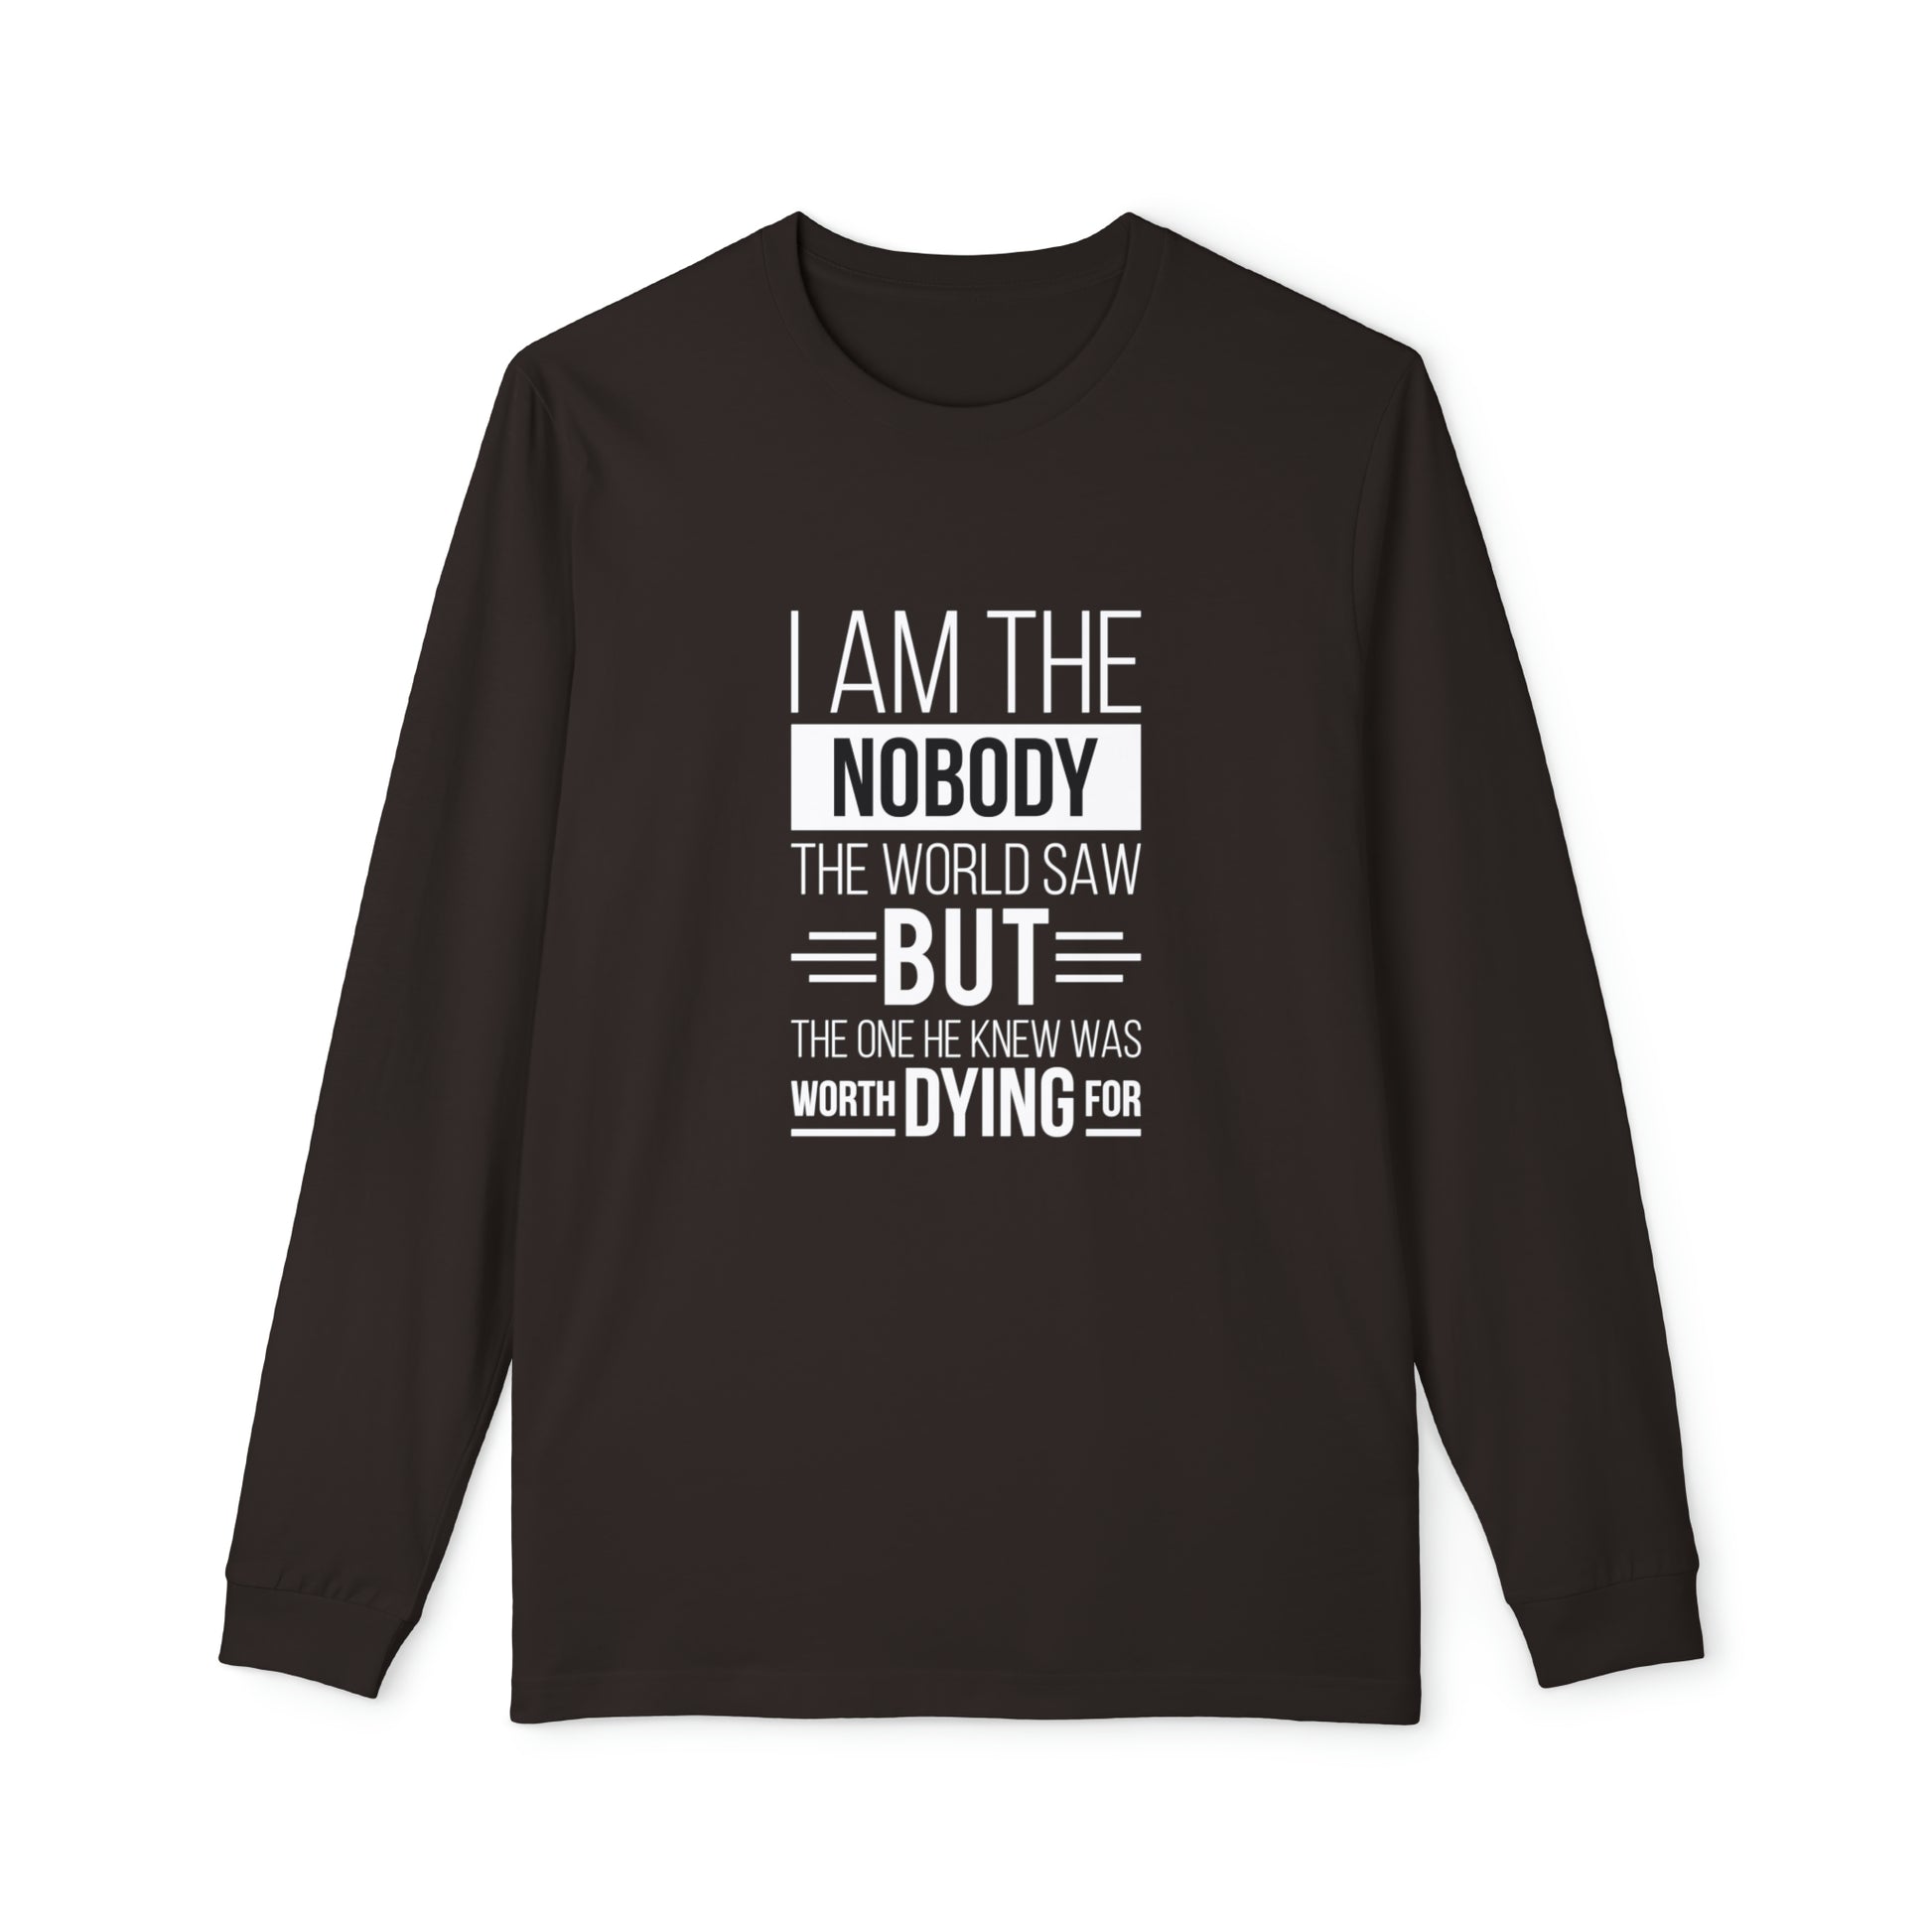 I Am The Nobody The World Saw But The One He Knew Was Worth Dying For Women's Christian Long Sleeve Pajama Set Printify